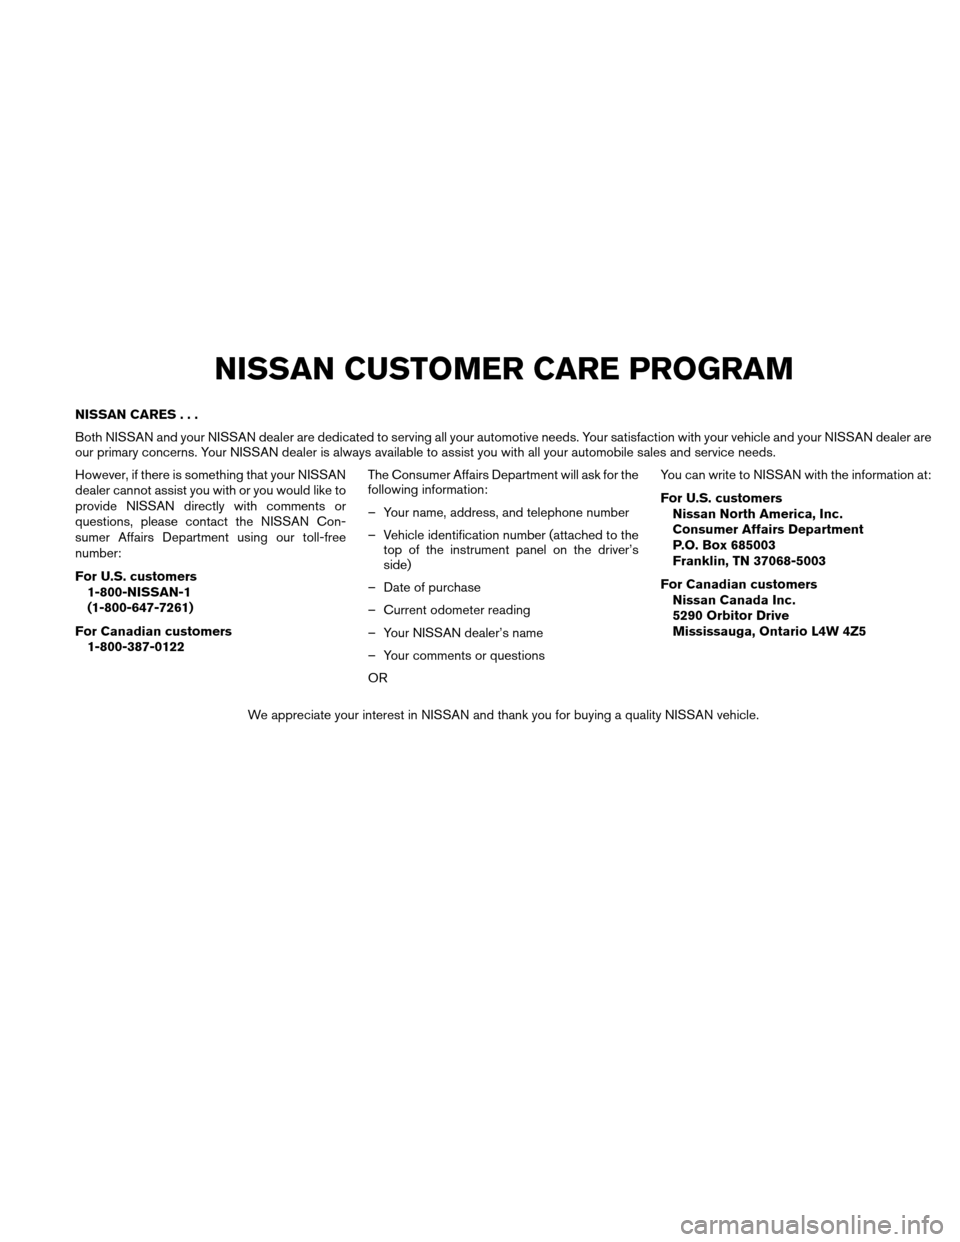 NISSAN ALTIMA HYBRID 2010 L32A / 4.G Owners Manual NISSAN CARES...
Both NISSAN and your NISSAN dealer are dedicated to serving all your automotive needs. Your satisfaction with your vehicle and your NISSAN dealer are
our primary concerns. Your NISSAN 